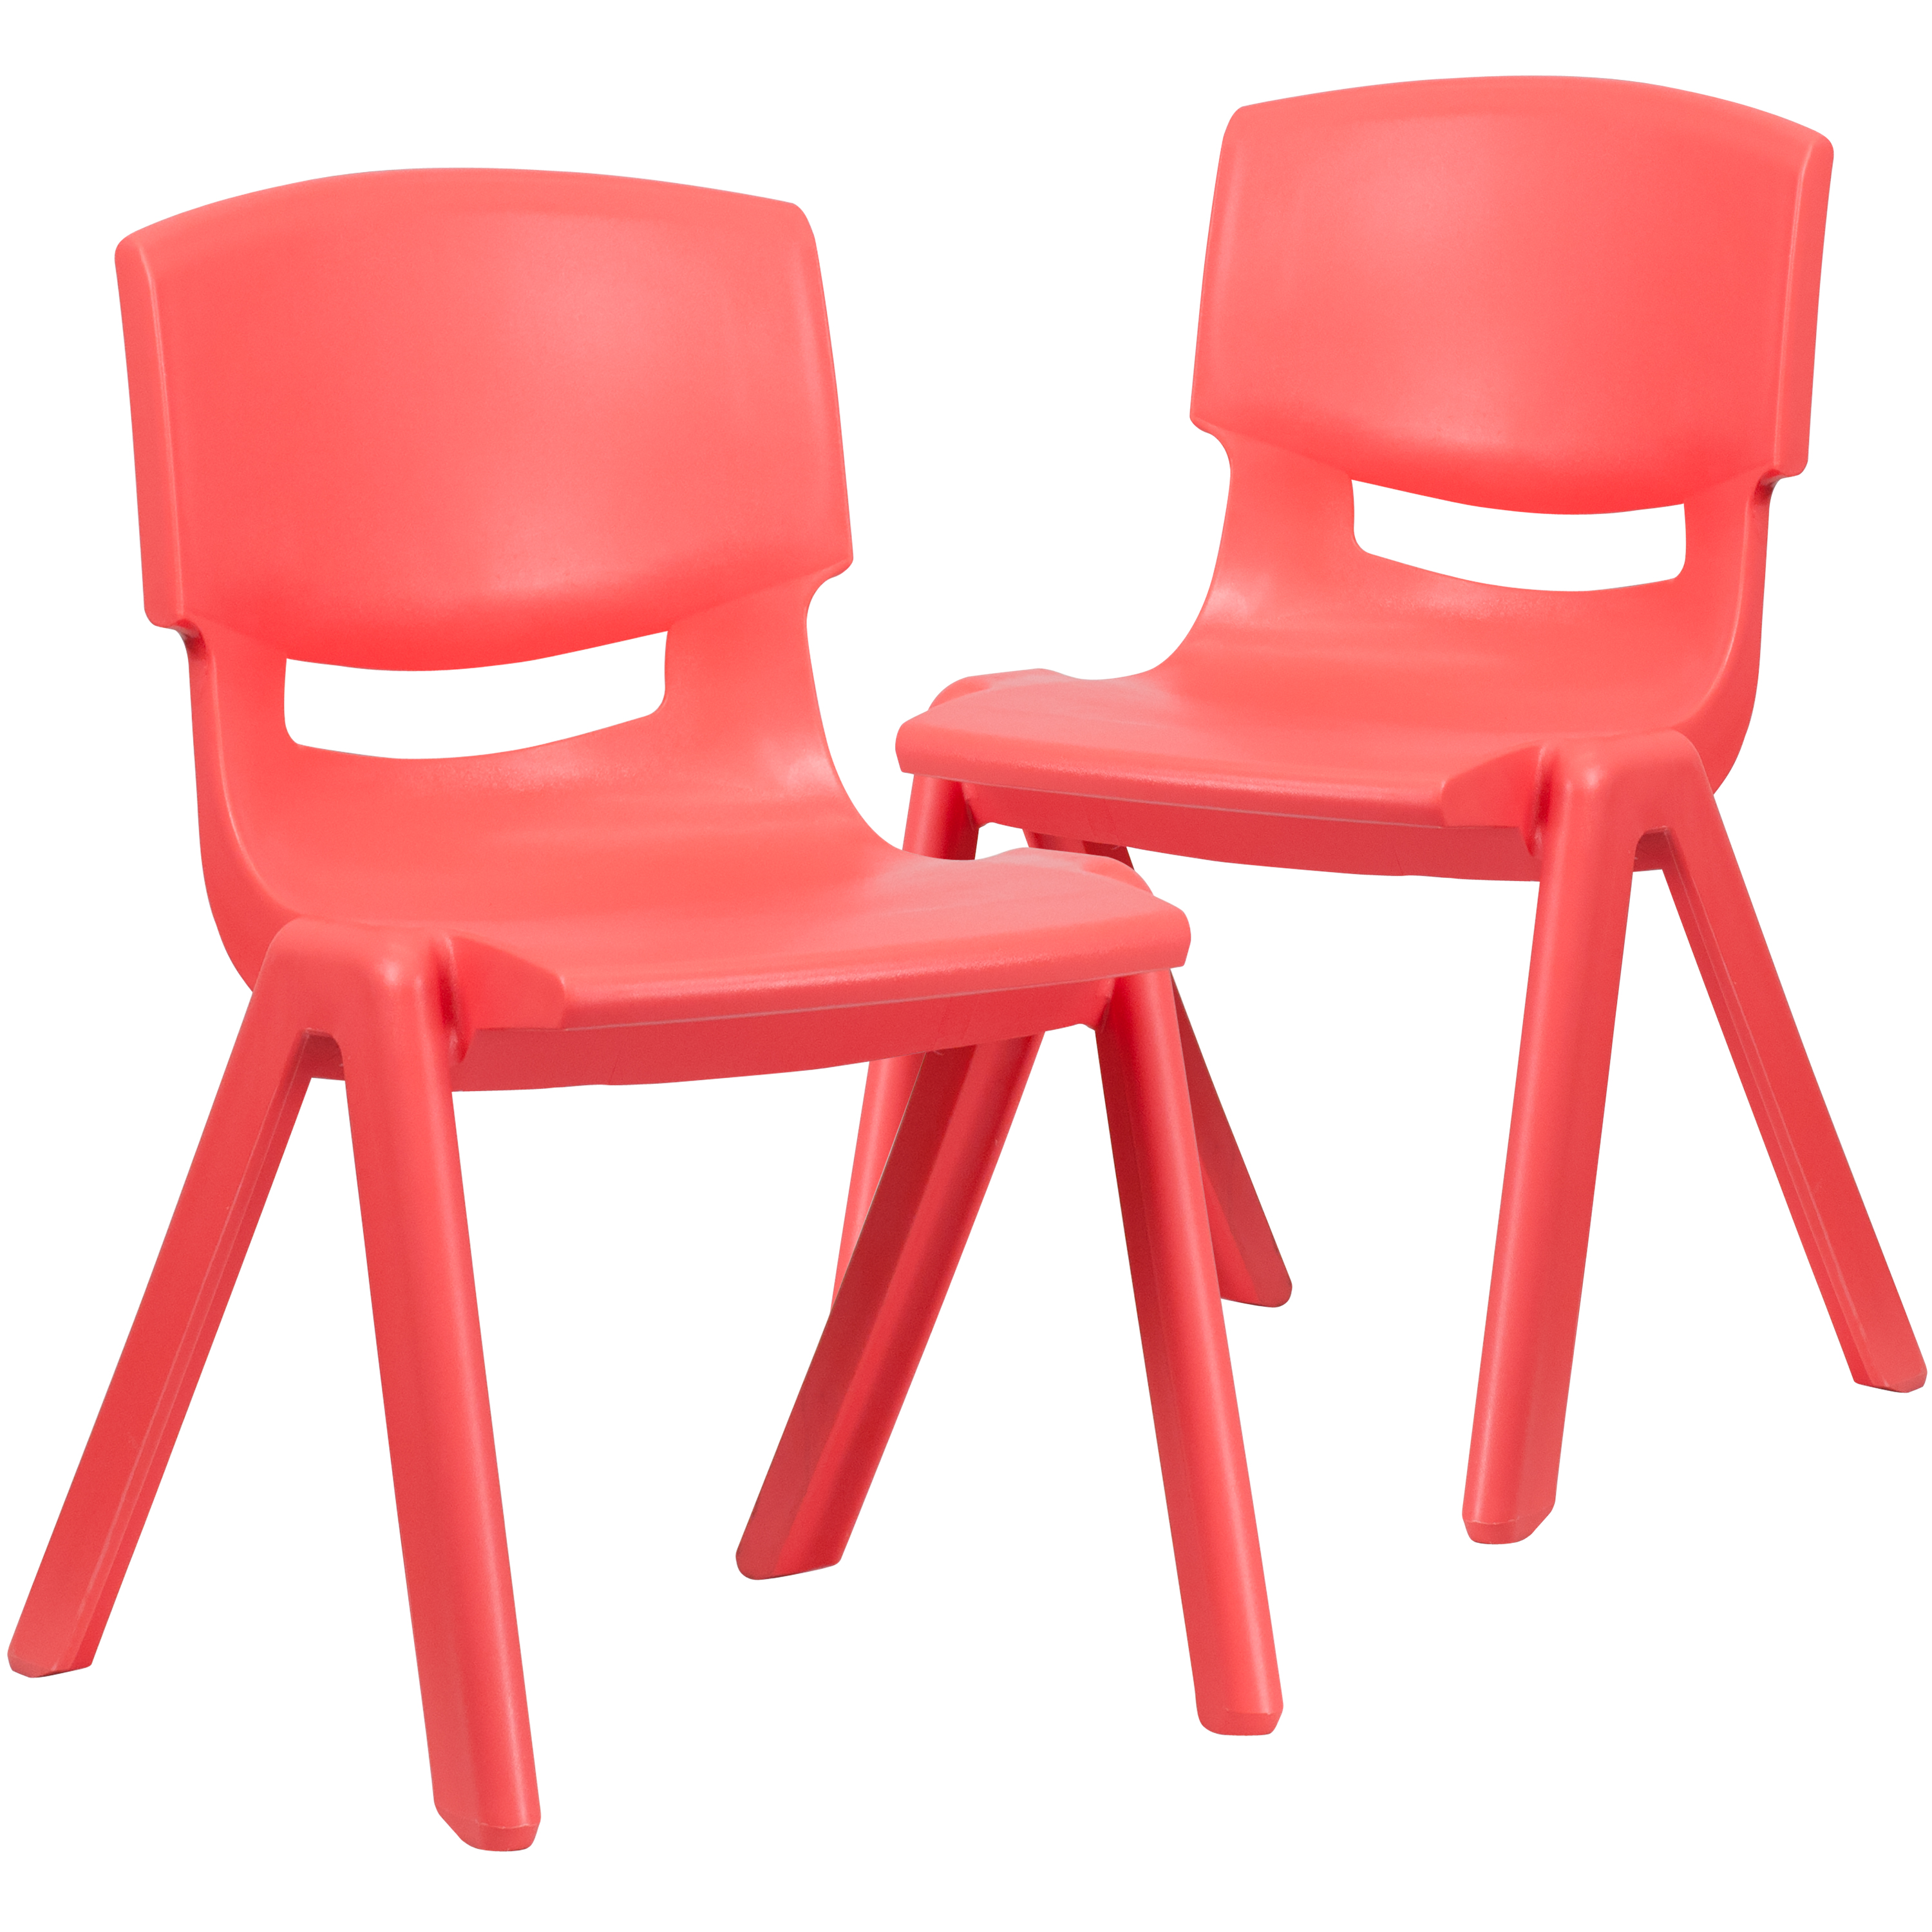 Flash Furniture 2-YU-YCX-005-RED-GG Red Plastic Stackable School Chair with 15.5" Seat Height, 2 Pack